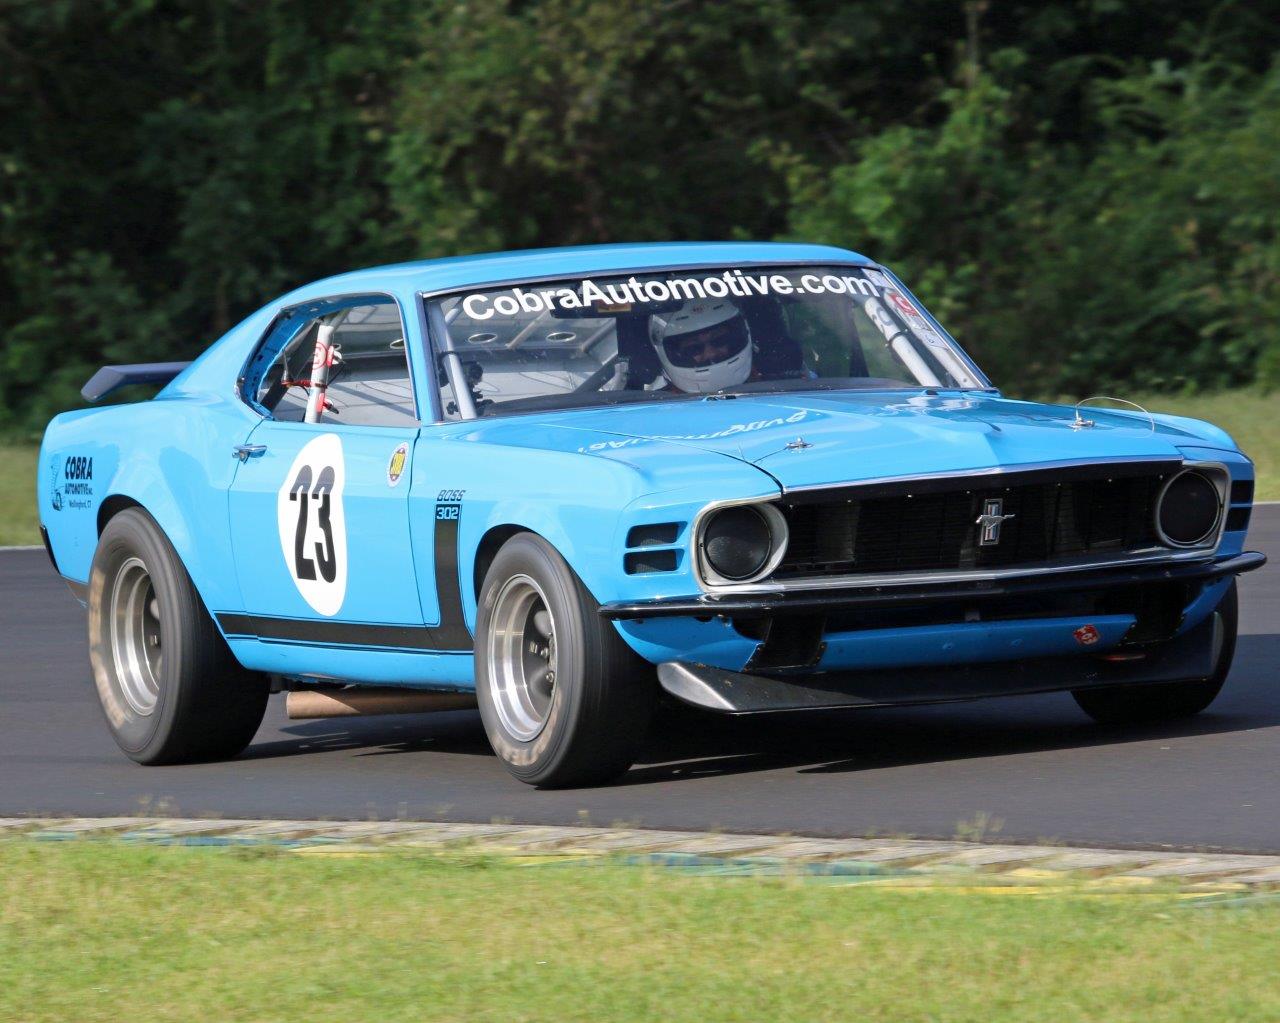 Vintage Mustang racing at the Heacock Classic Gold Cup